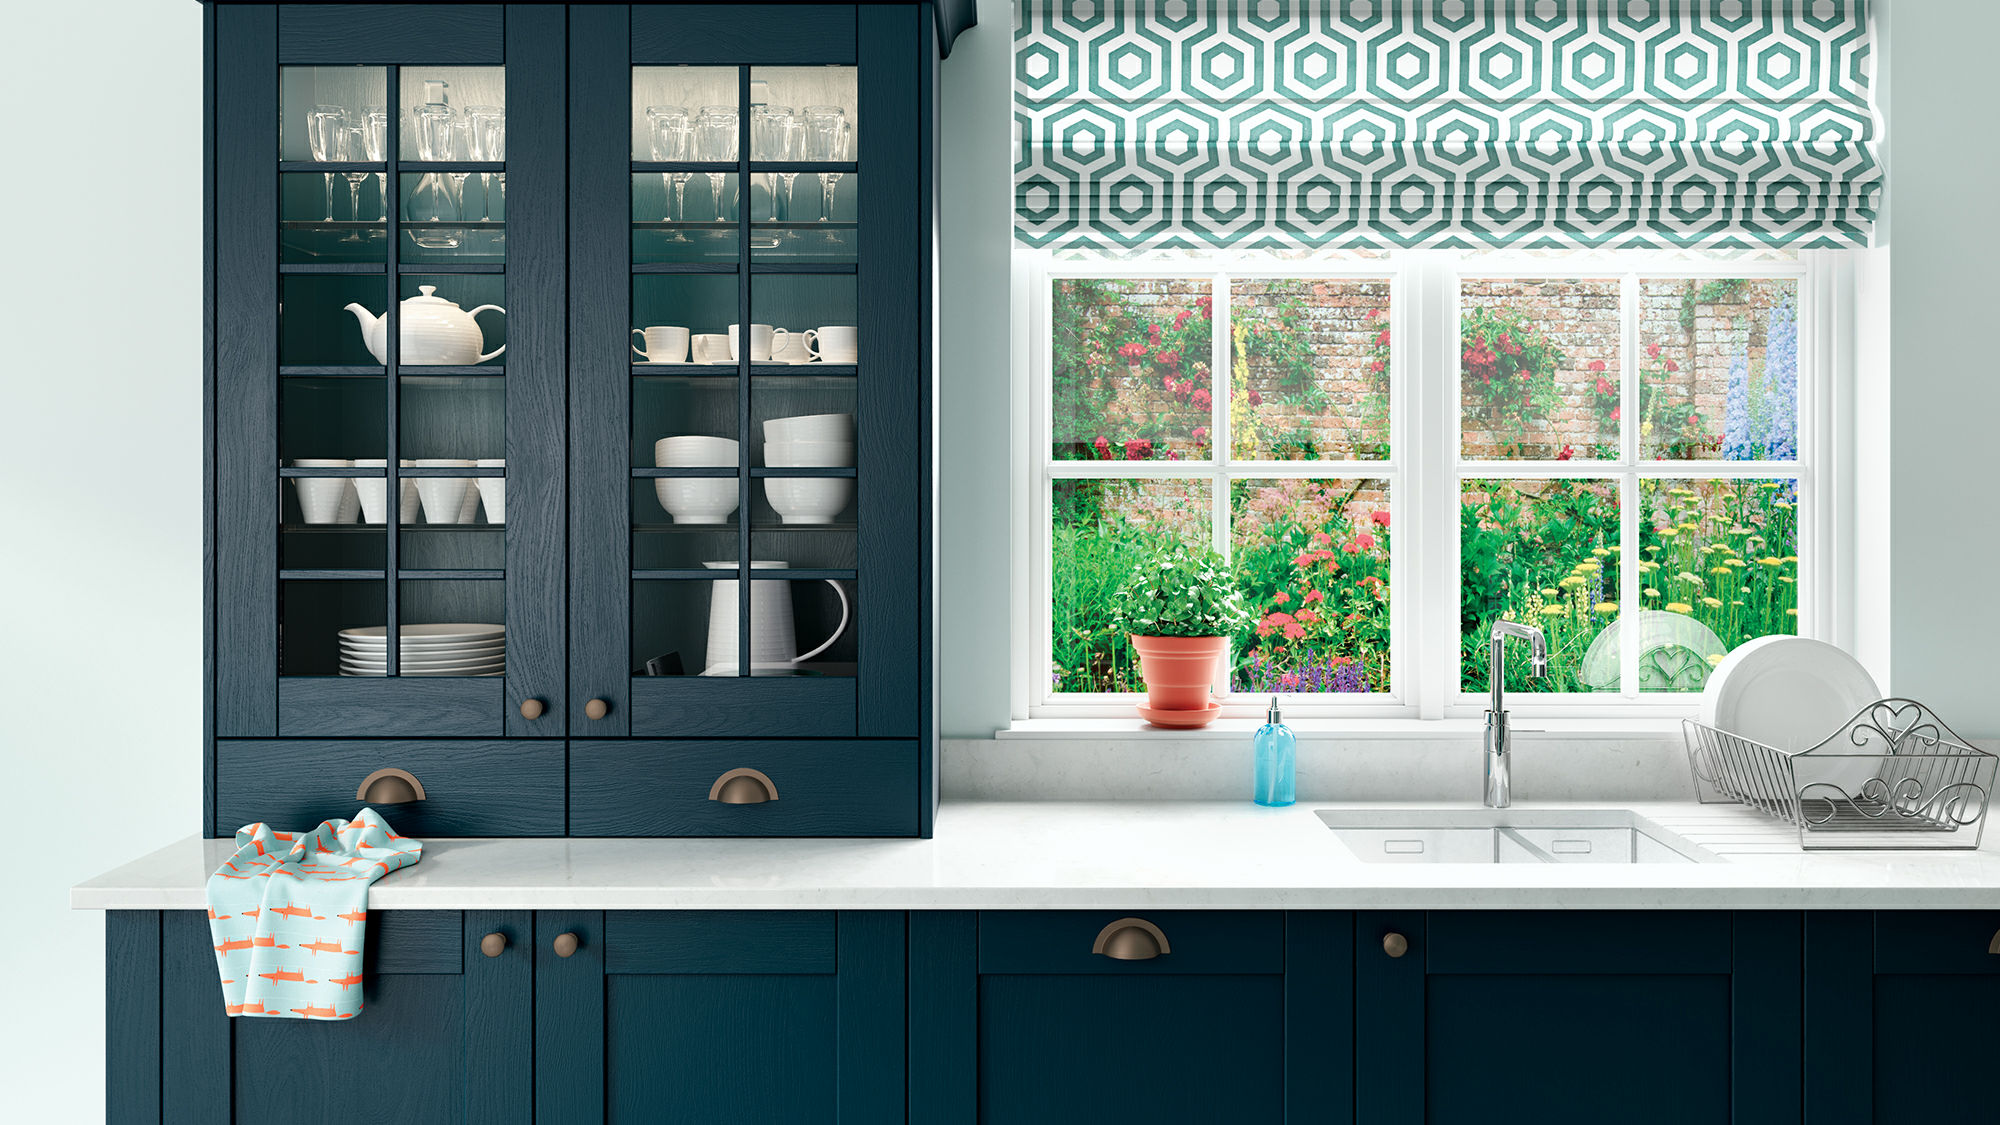 Madison Solid Wood Marine kitchens in a classic marine blue for a bold yet traditional kitchen setting